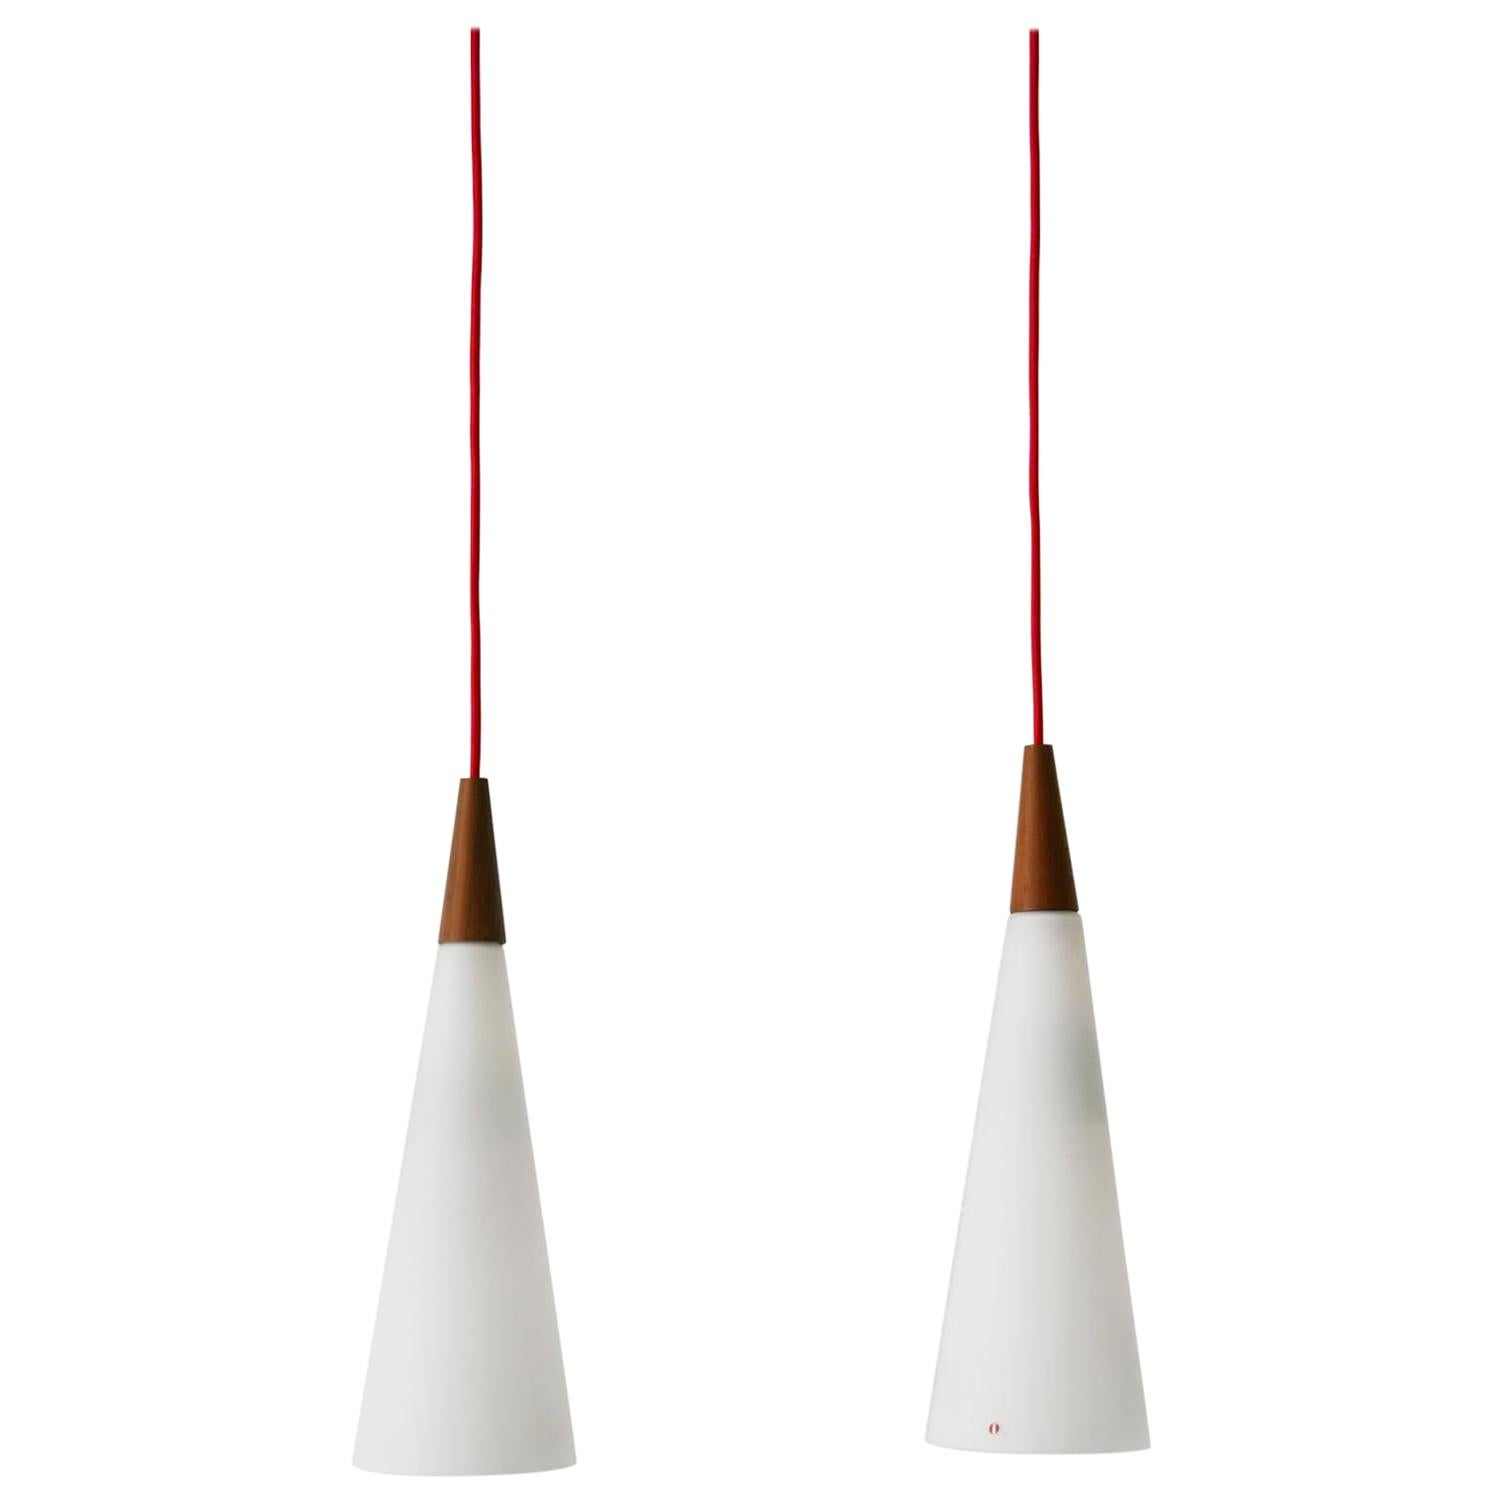 Set of Two Mid-Century Modern Pendant Lamps by Iittala, Finland, 1960s